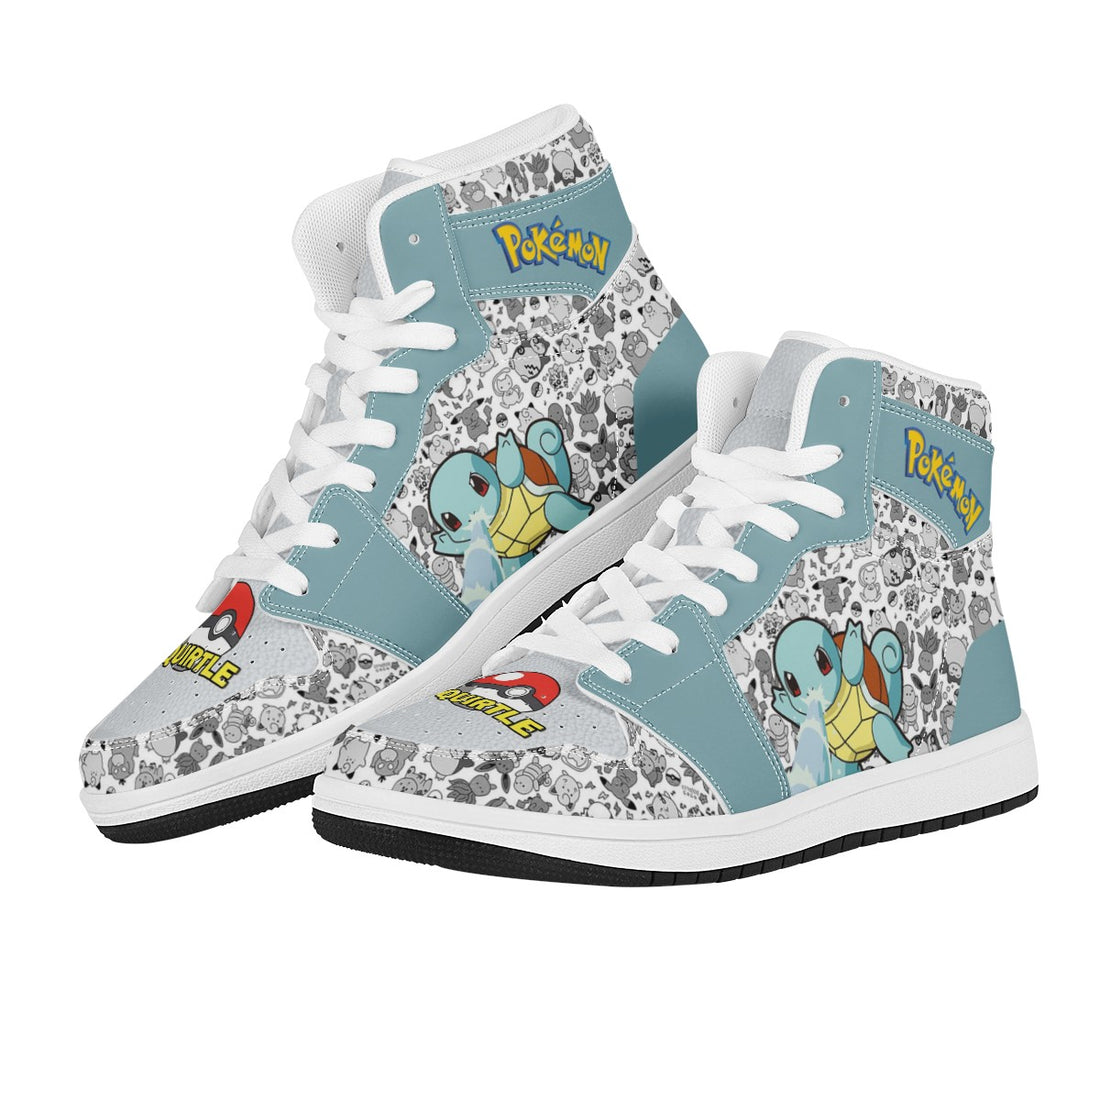 Pokémon Sneakers Squirtle